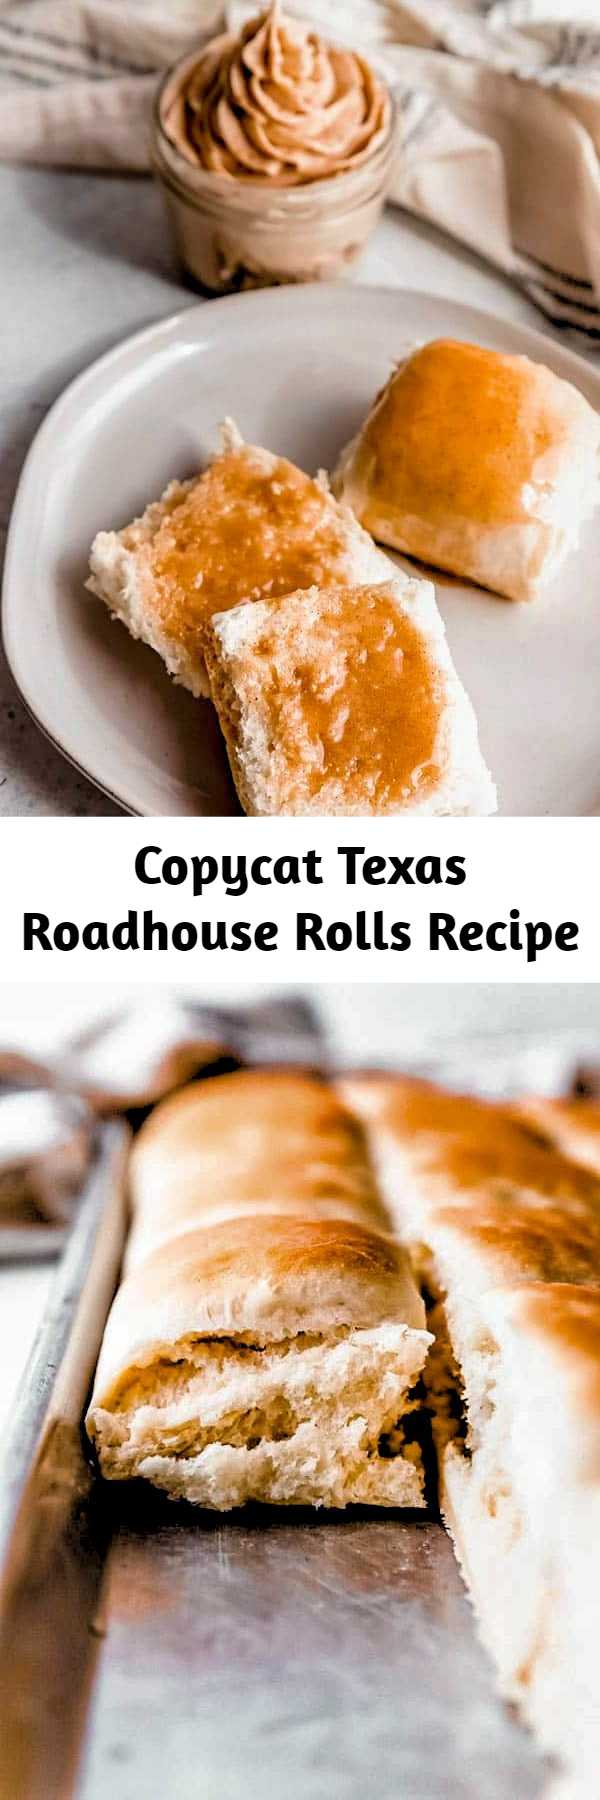 This easy Copycat Texas Roadhouse Rolls recipe smeared with Cinnamon Honey Butter is just like the restaurant's, and is melt-in-your-mouth delicious!